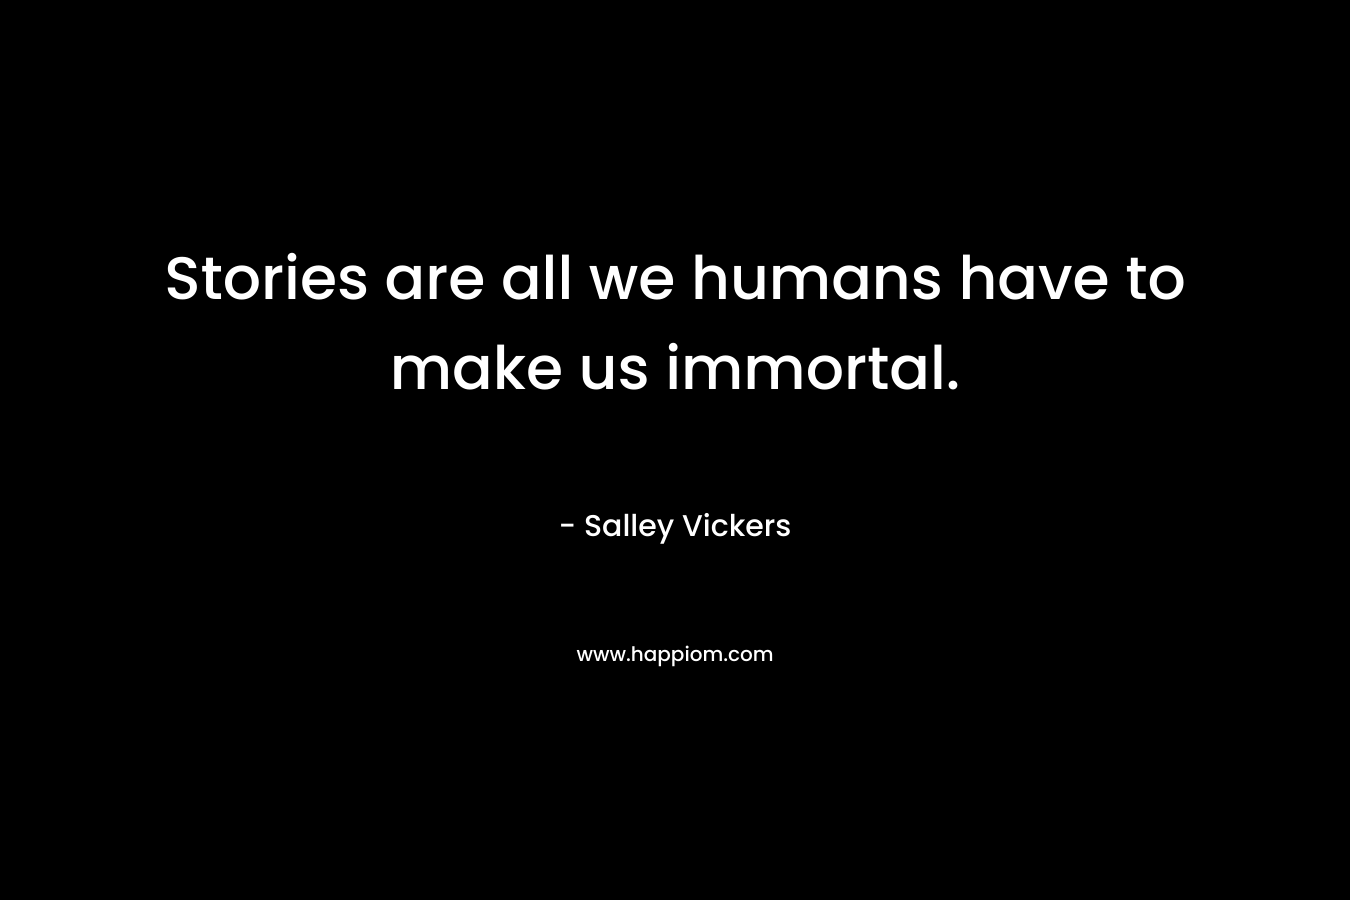 Stories are all we humans have to make us immortal. – Salley Vickers